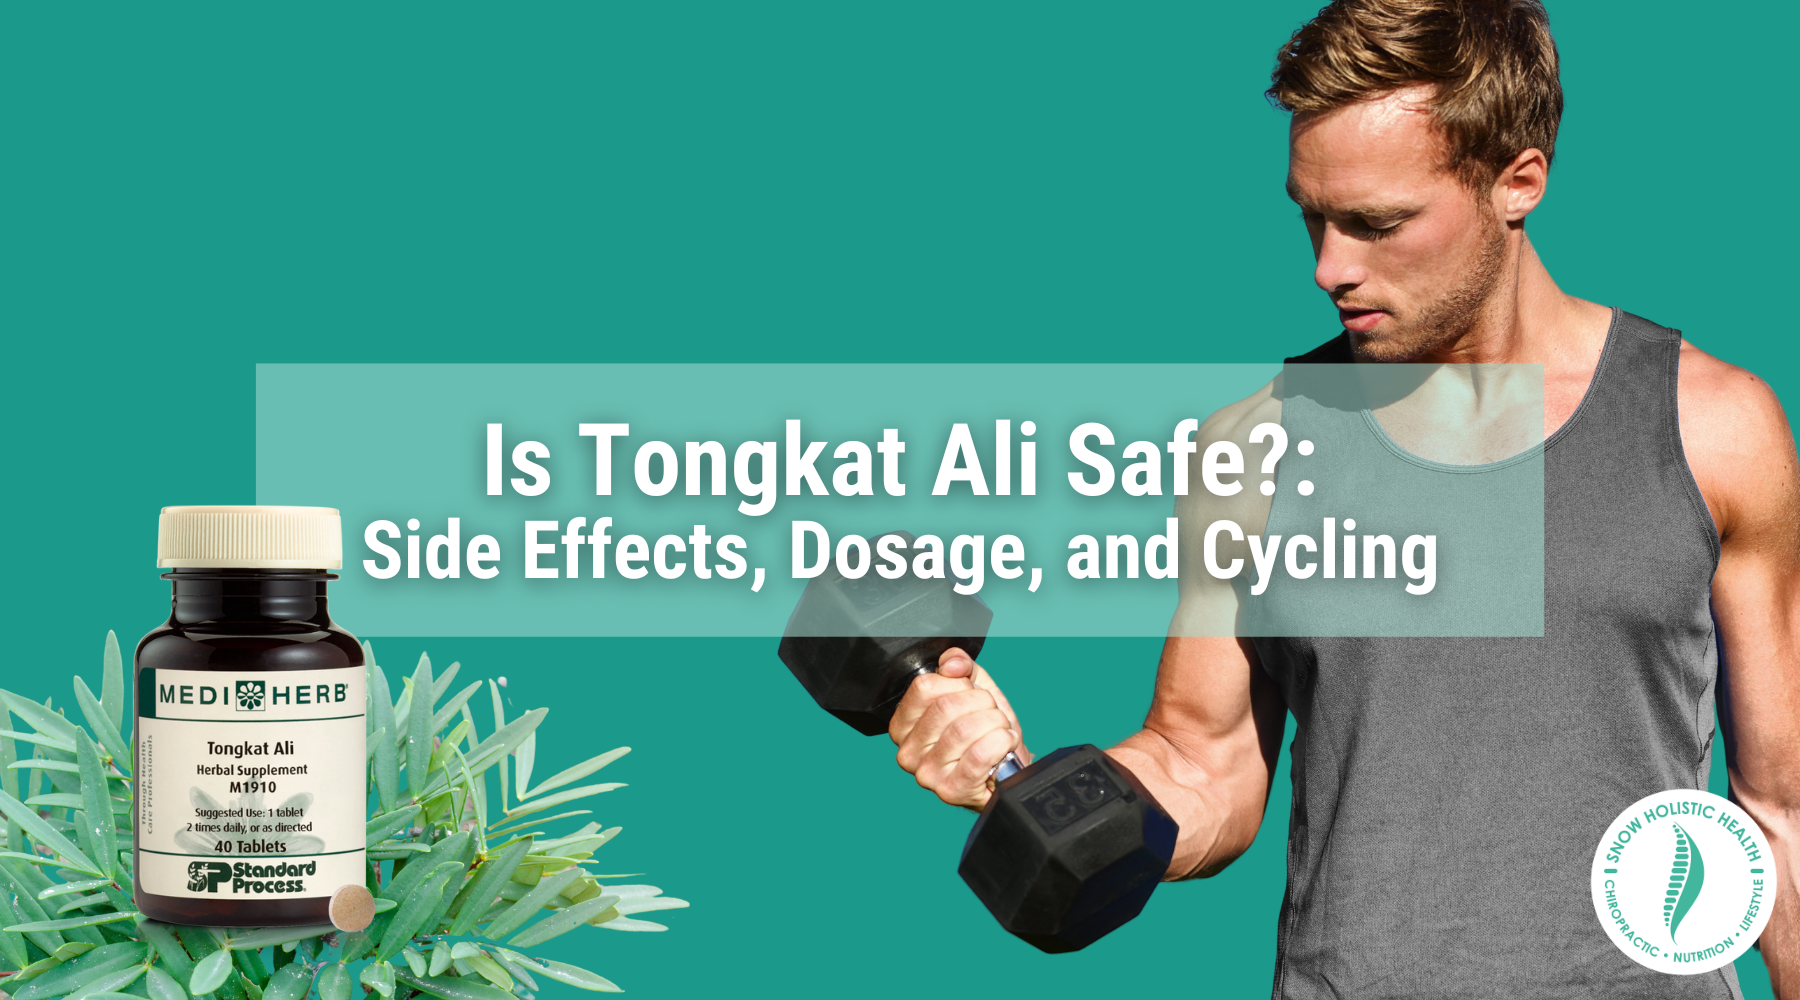 Is Tongkat Ali Safe?: Side Effects, Dosage, and Cycling